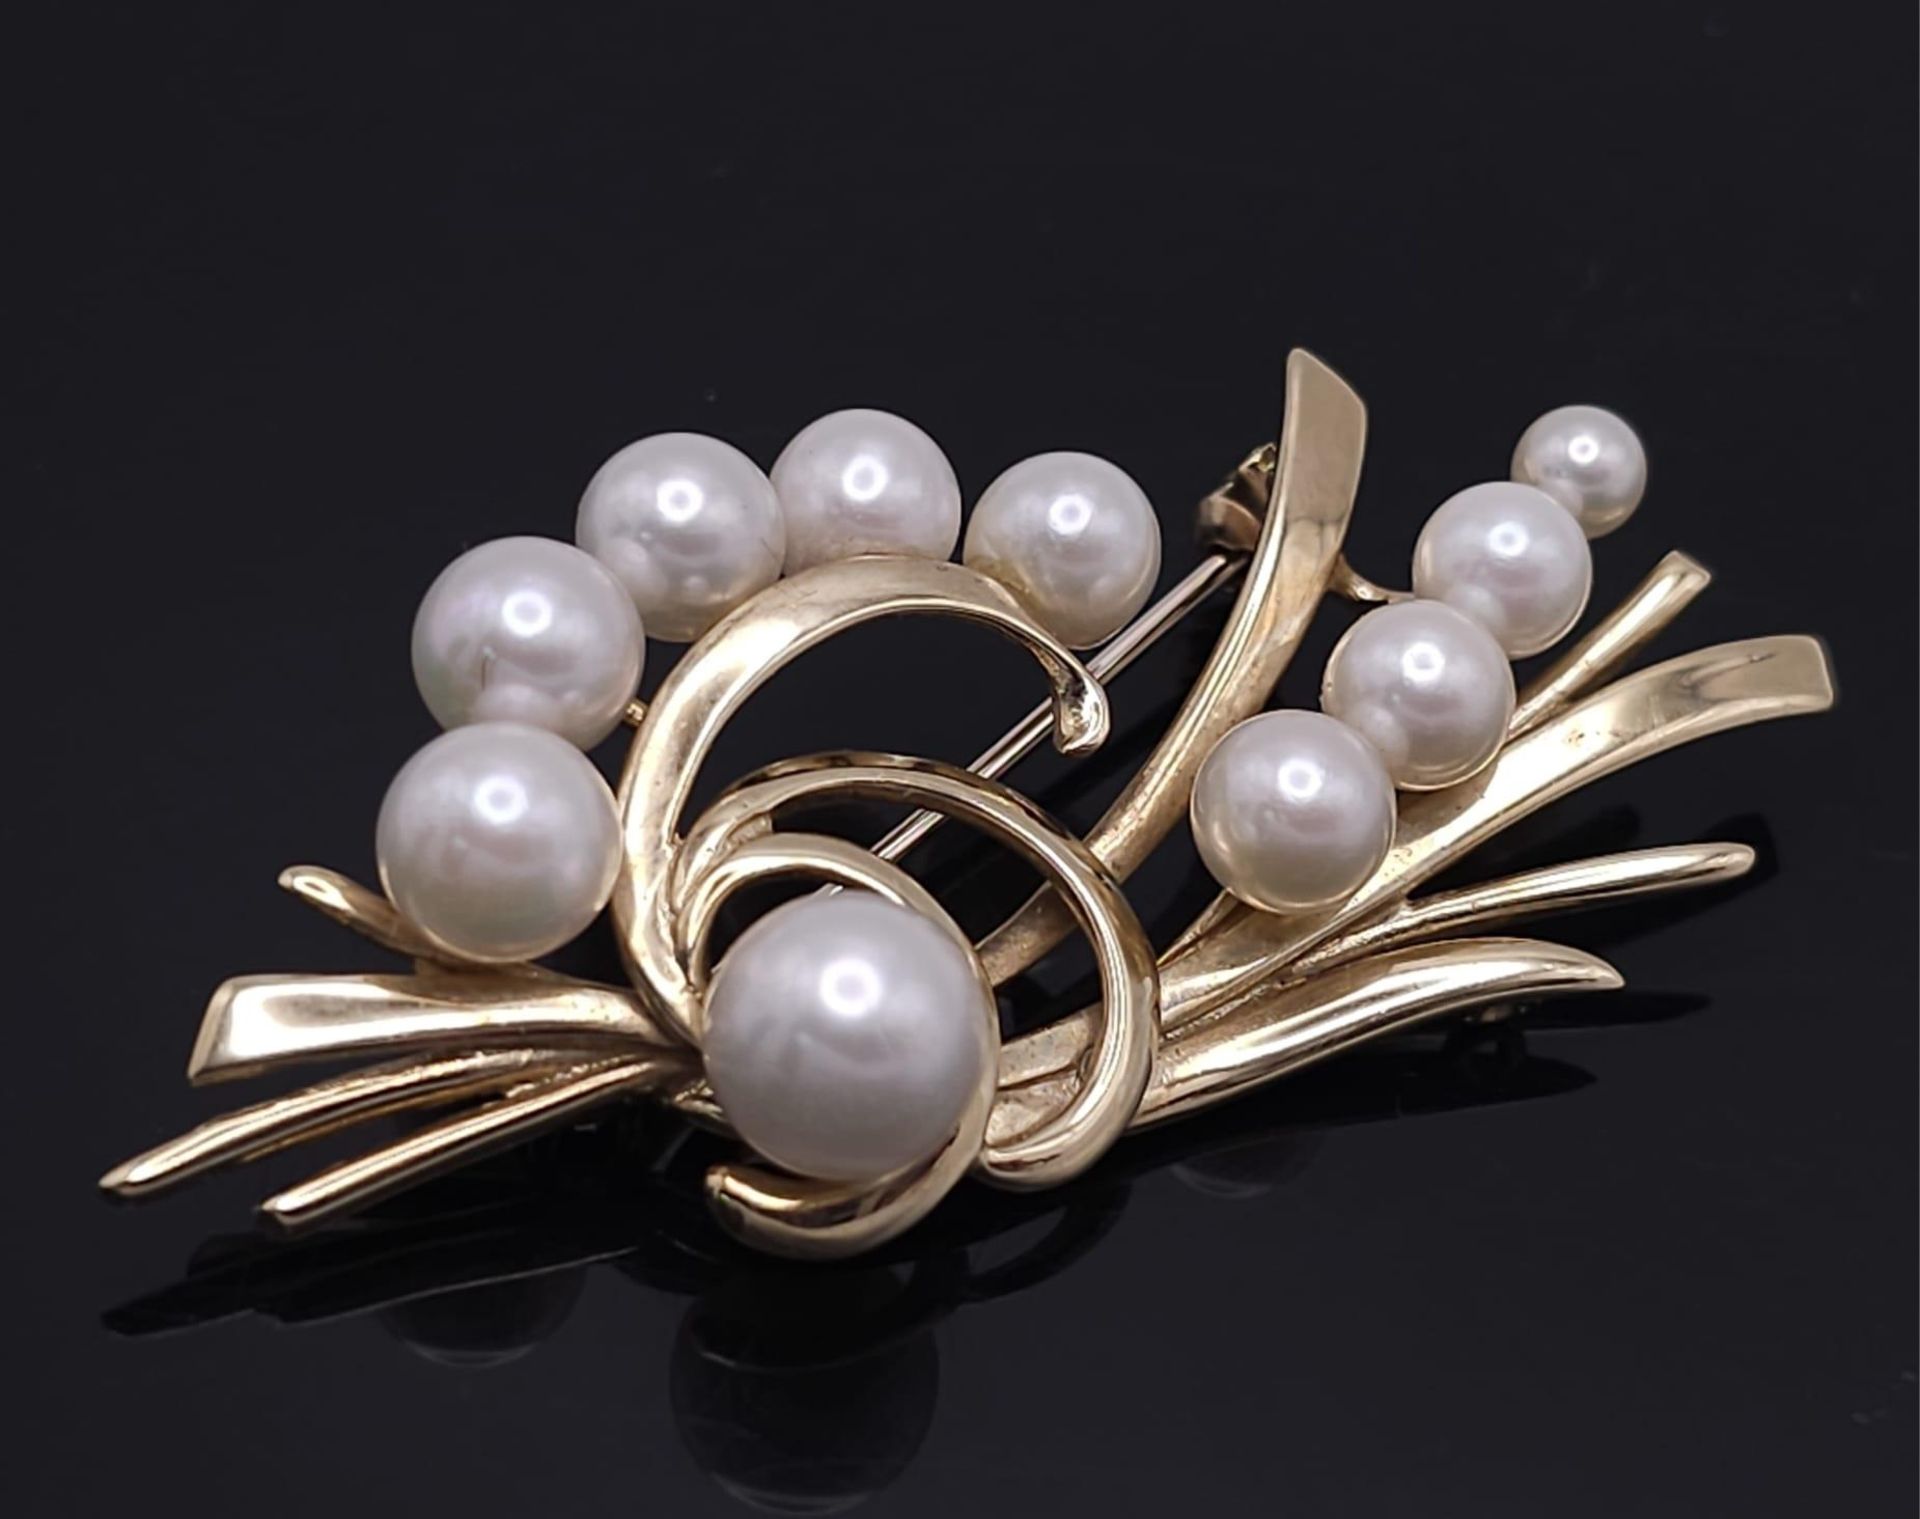 A 9k Yellow Gold and Pearl Decorative Floral Brooch. 5cm. 8g weight - Image 2 of 23